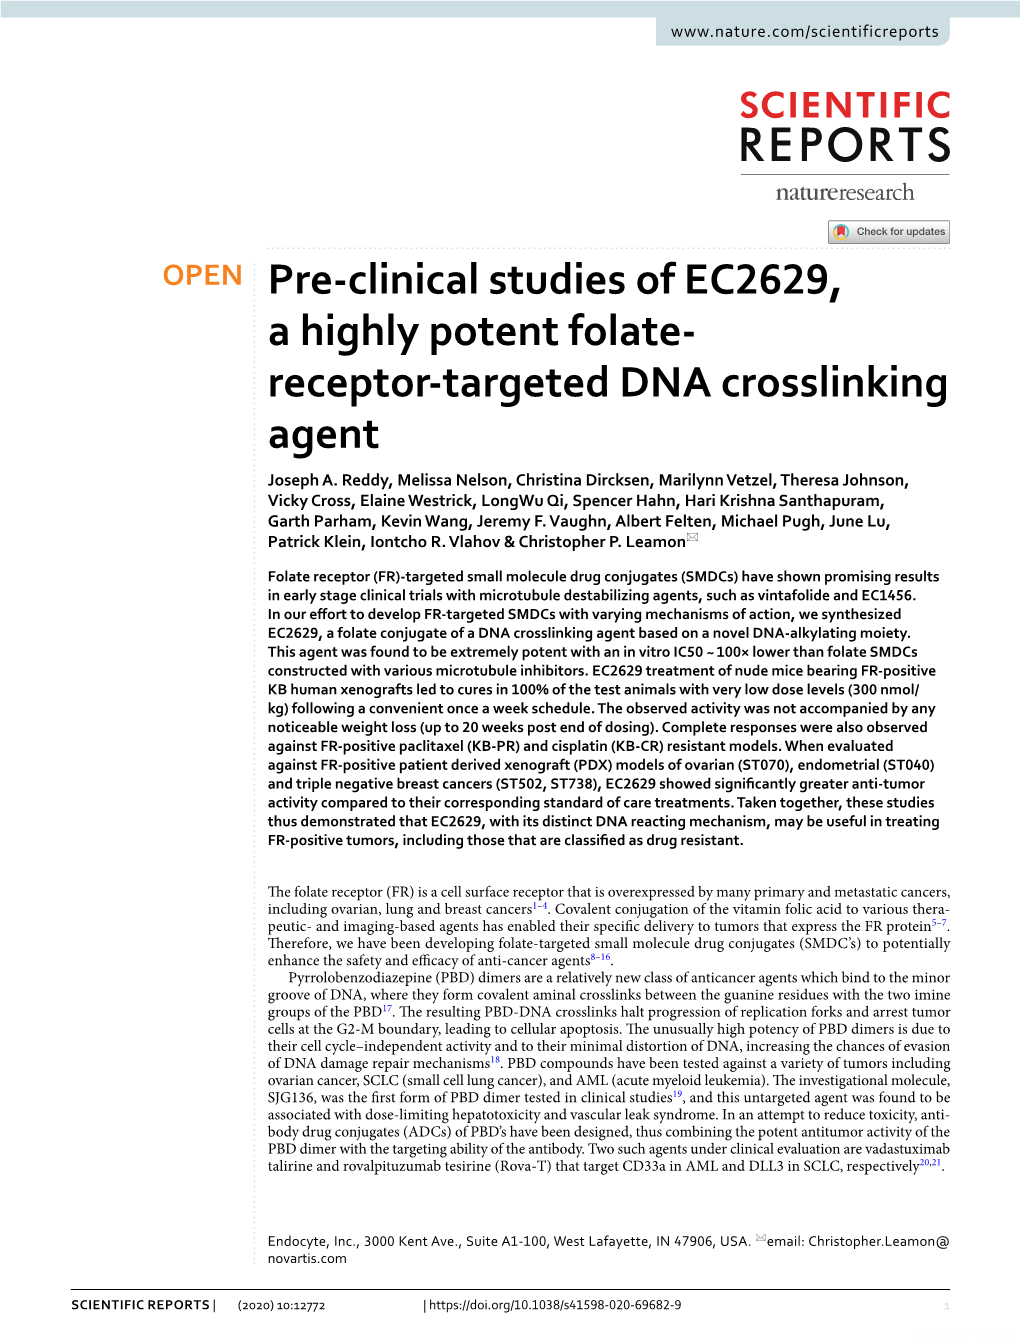 Pre-Clinical Studies of EC2629, a Highly Potent Folate- Receptor-Targeted DNA Crosslinking Agent